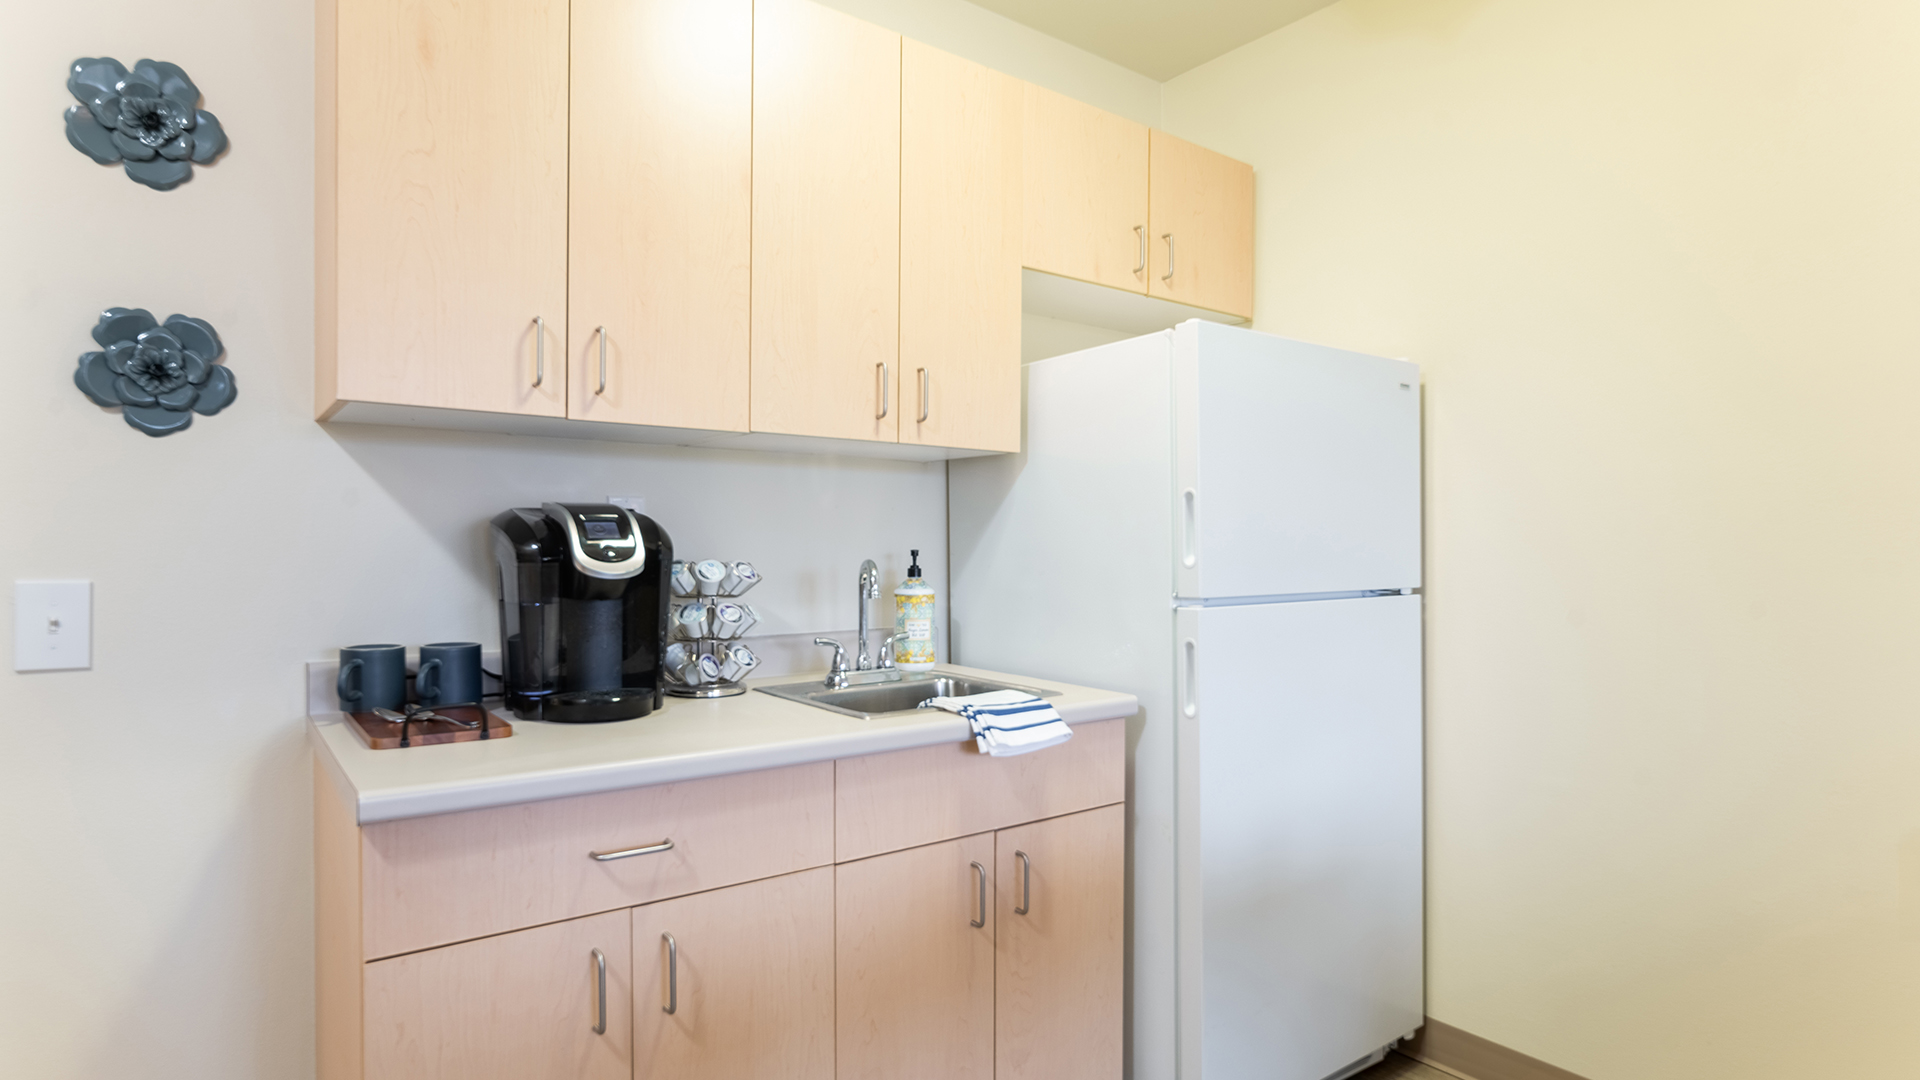 Kitchenette with coffee pot and refrigerator